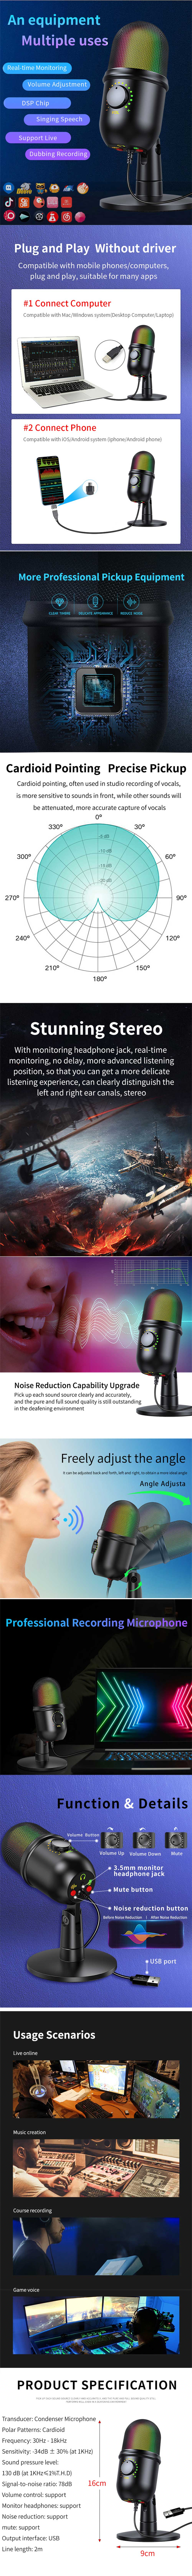 V5 USB Condenser Microphone Stereo Sound DSP Chip Intelligent Noise Reduction Mic RGB Light with 3.5mm Monitor Headphone Jack for Recording Studio Live Broadcast Streaming Mic System